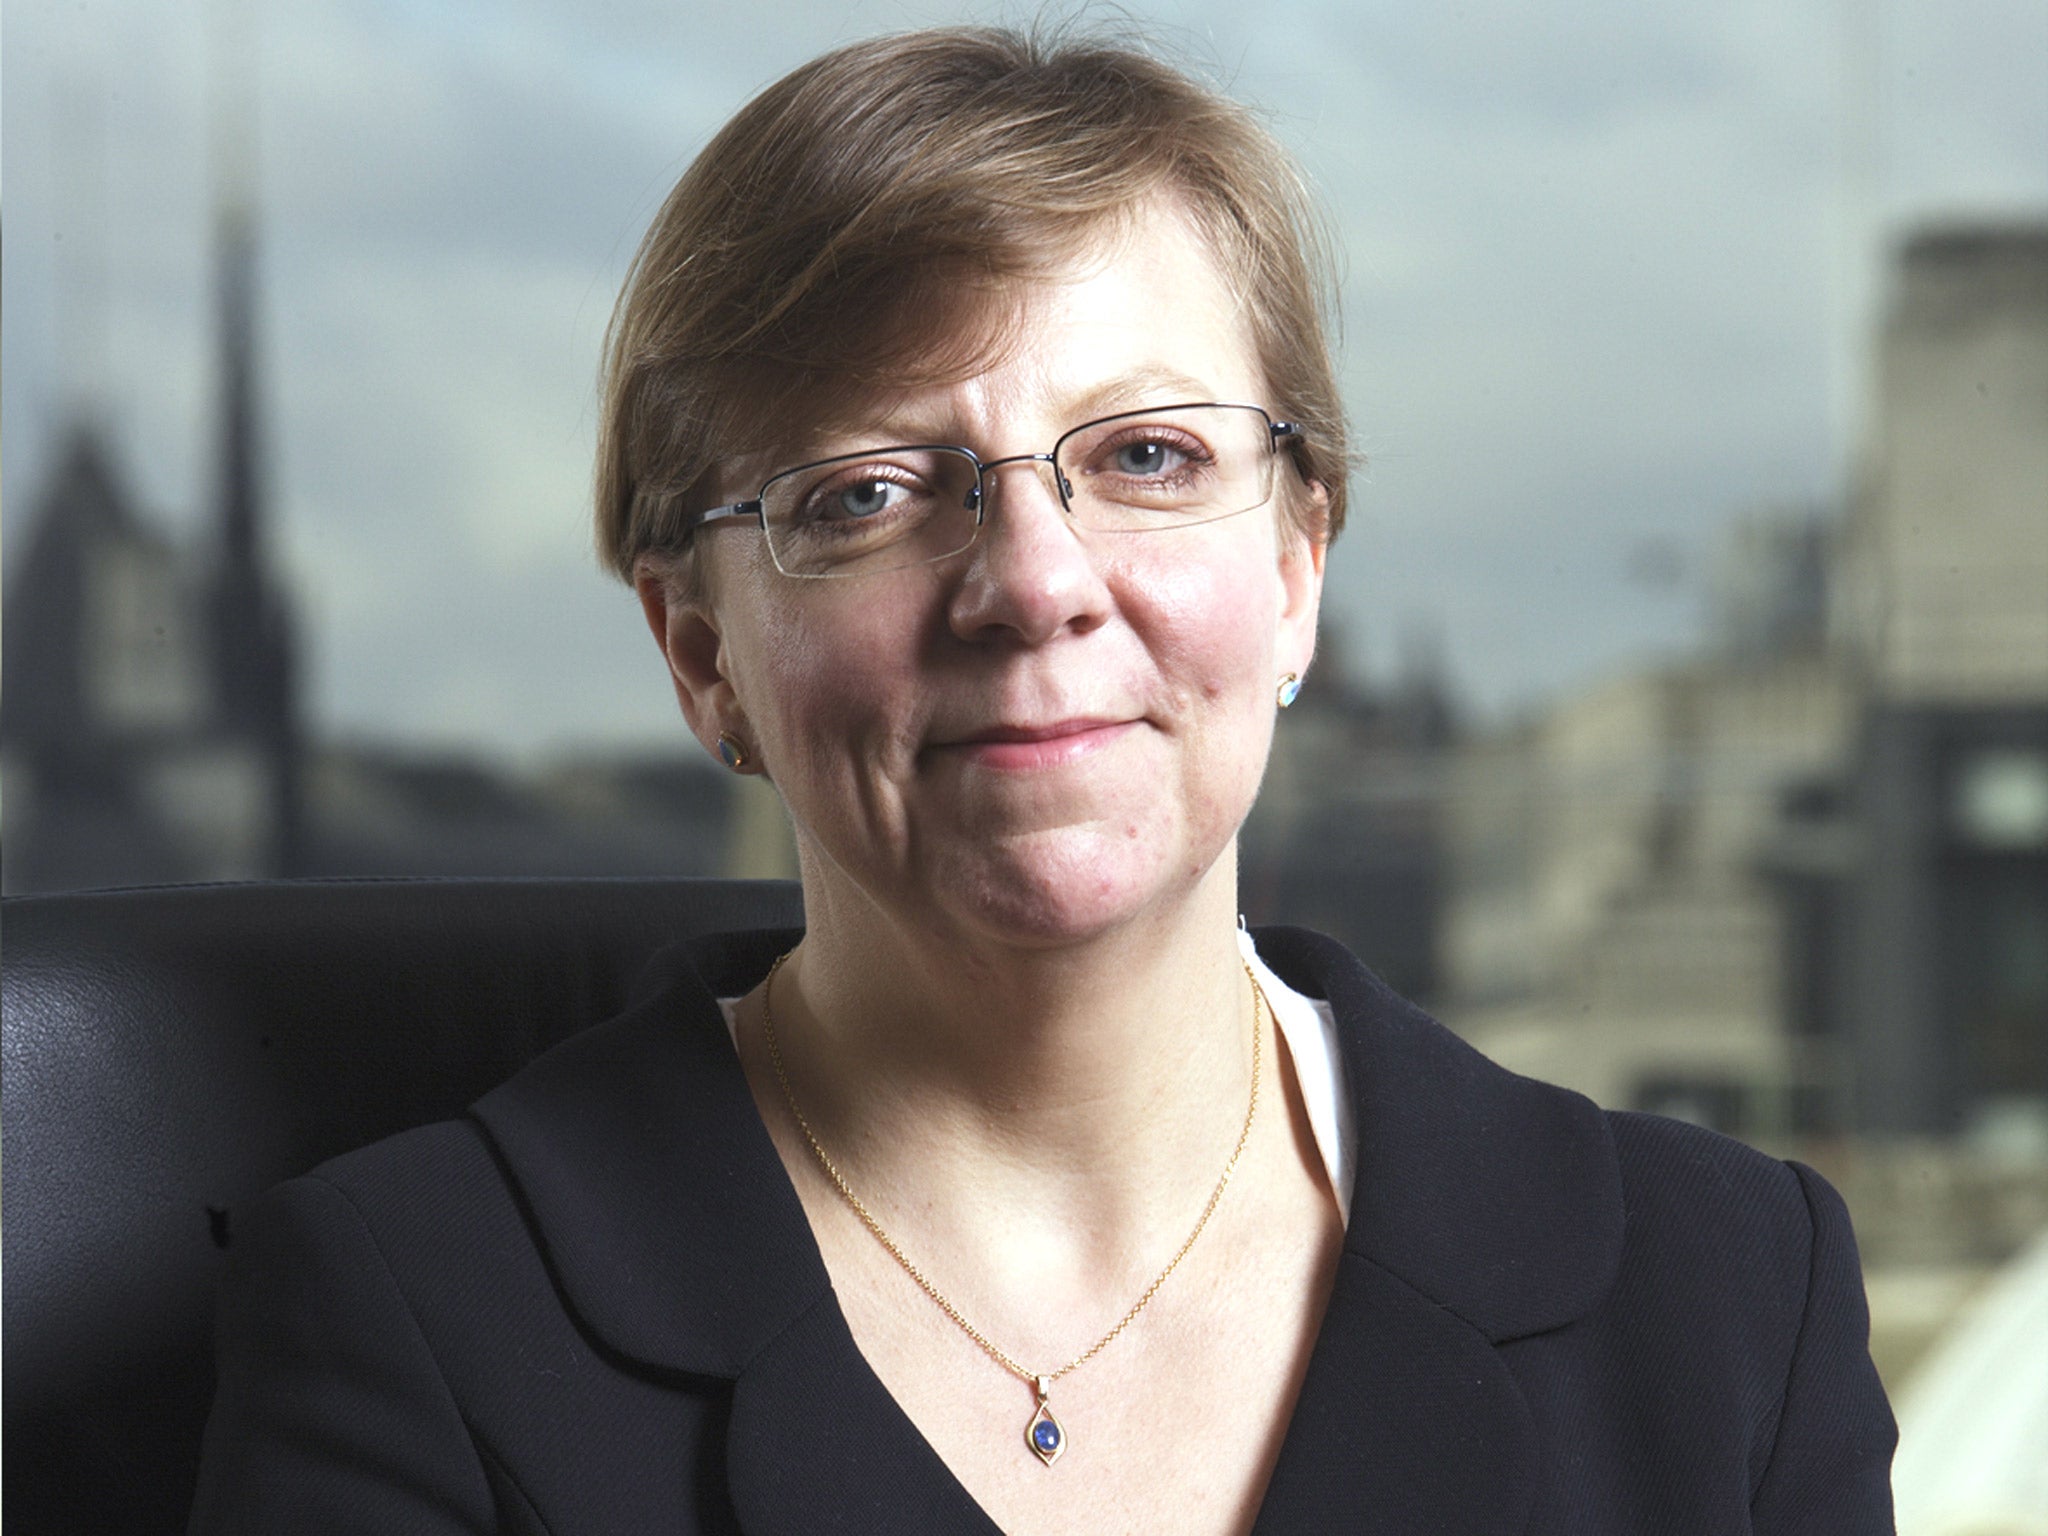 Alison Saunders, Director of Public Prosecutions, had previously declared that Lord Janner was unfit to stand trial